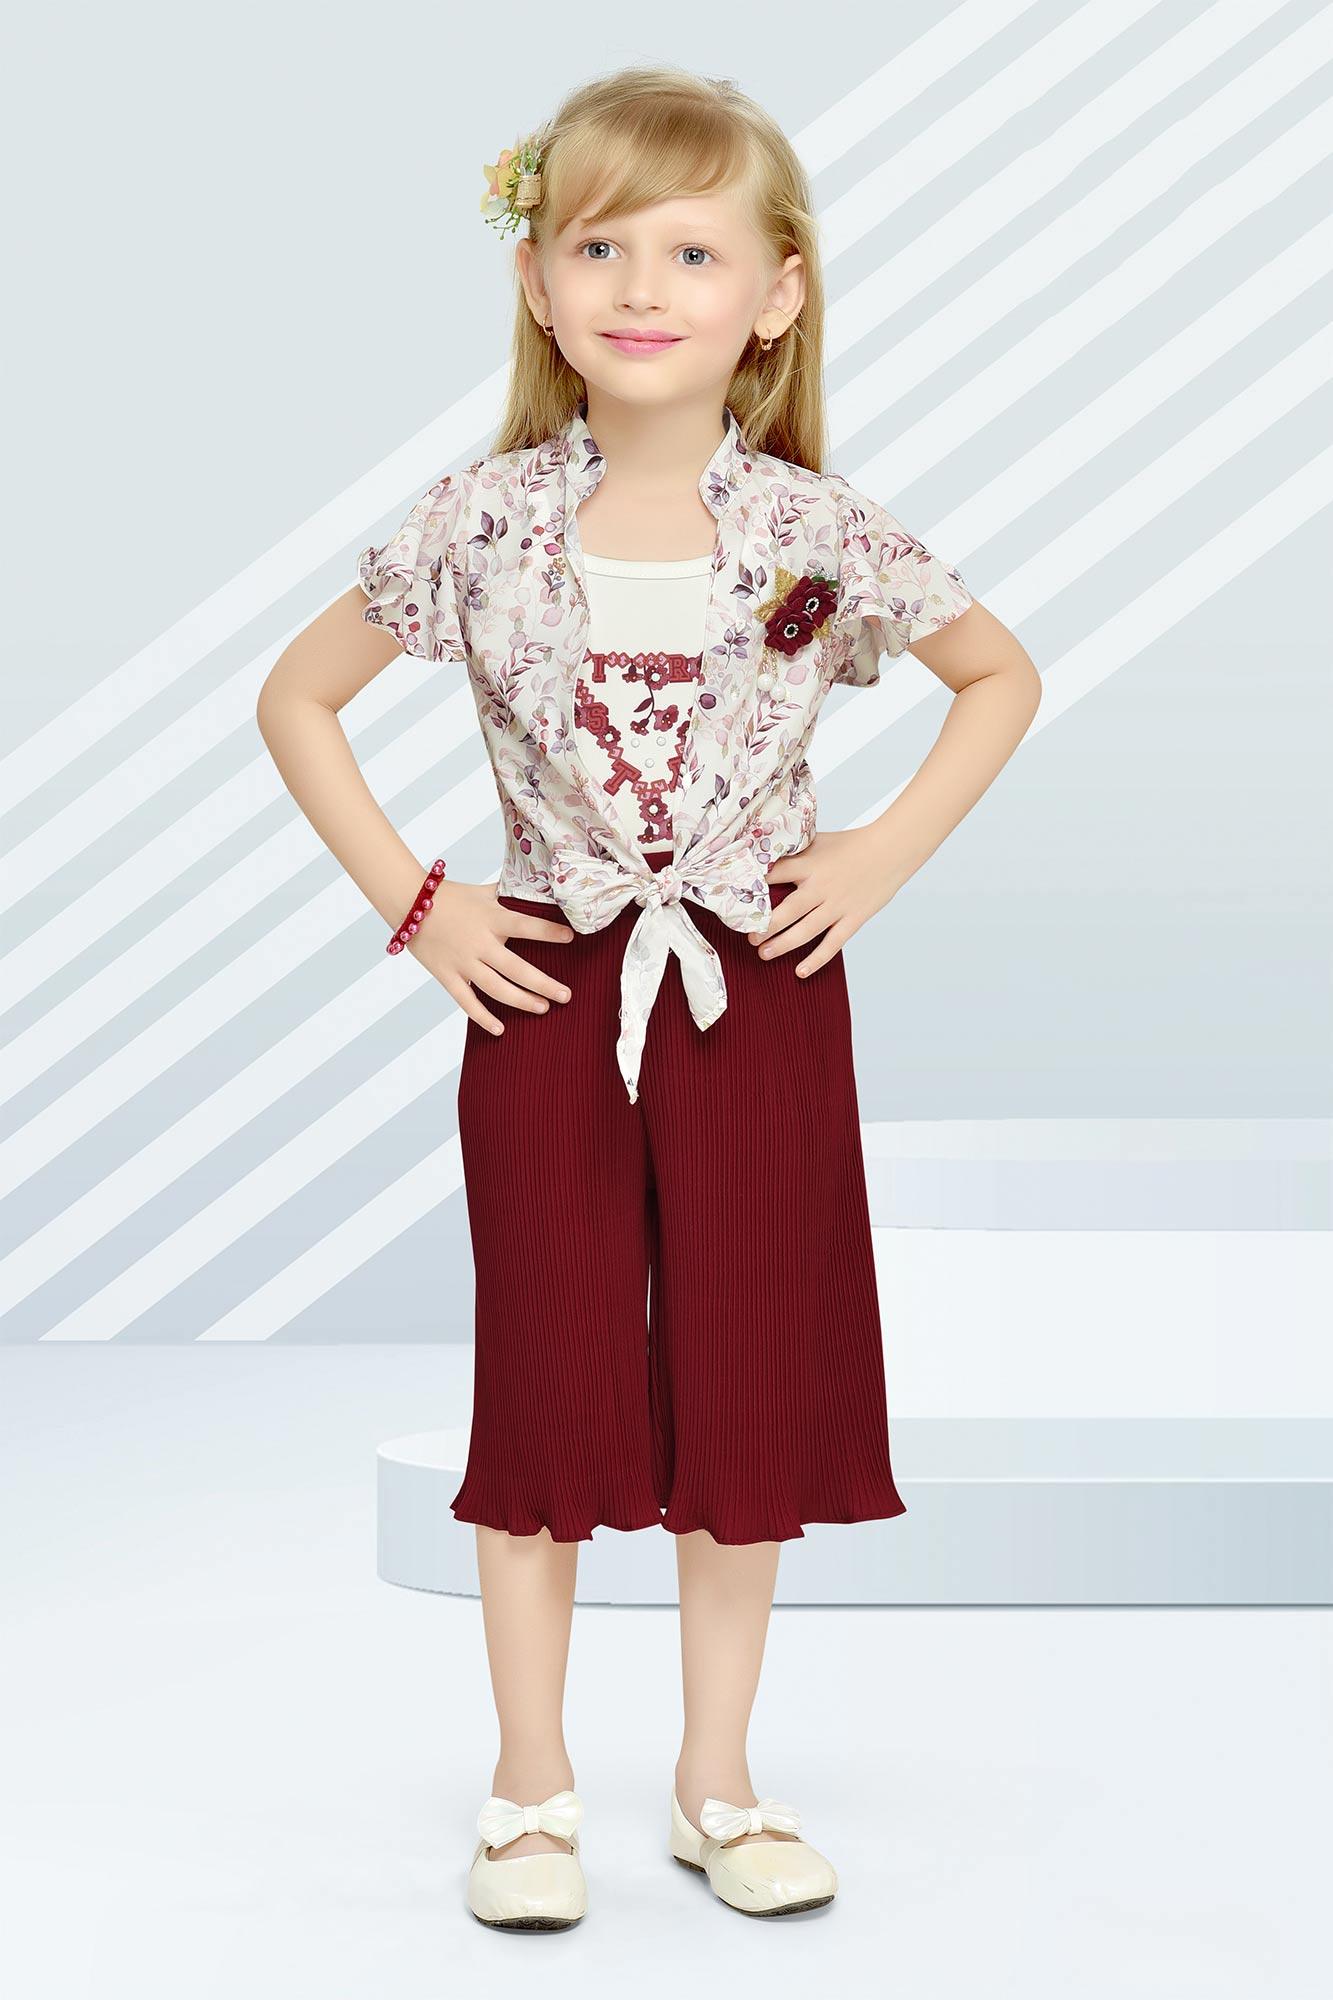 Chic Harmony: White Top and Maroon Pant Ensemble for Girls. - Lagorii Kids